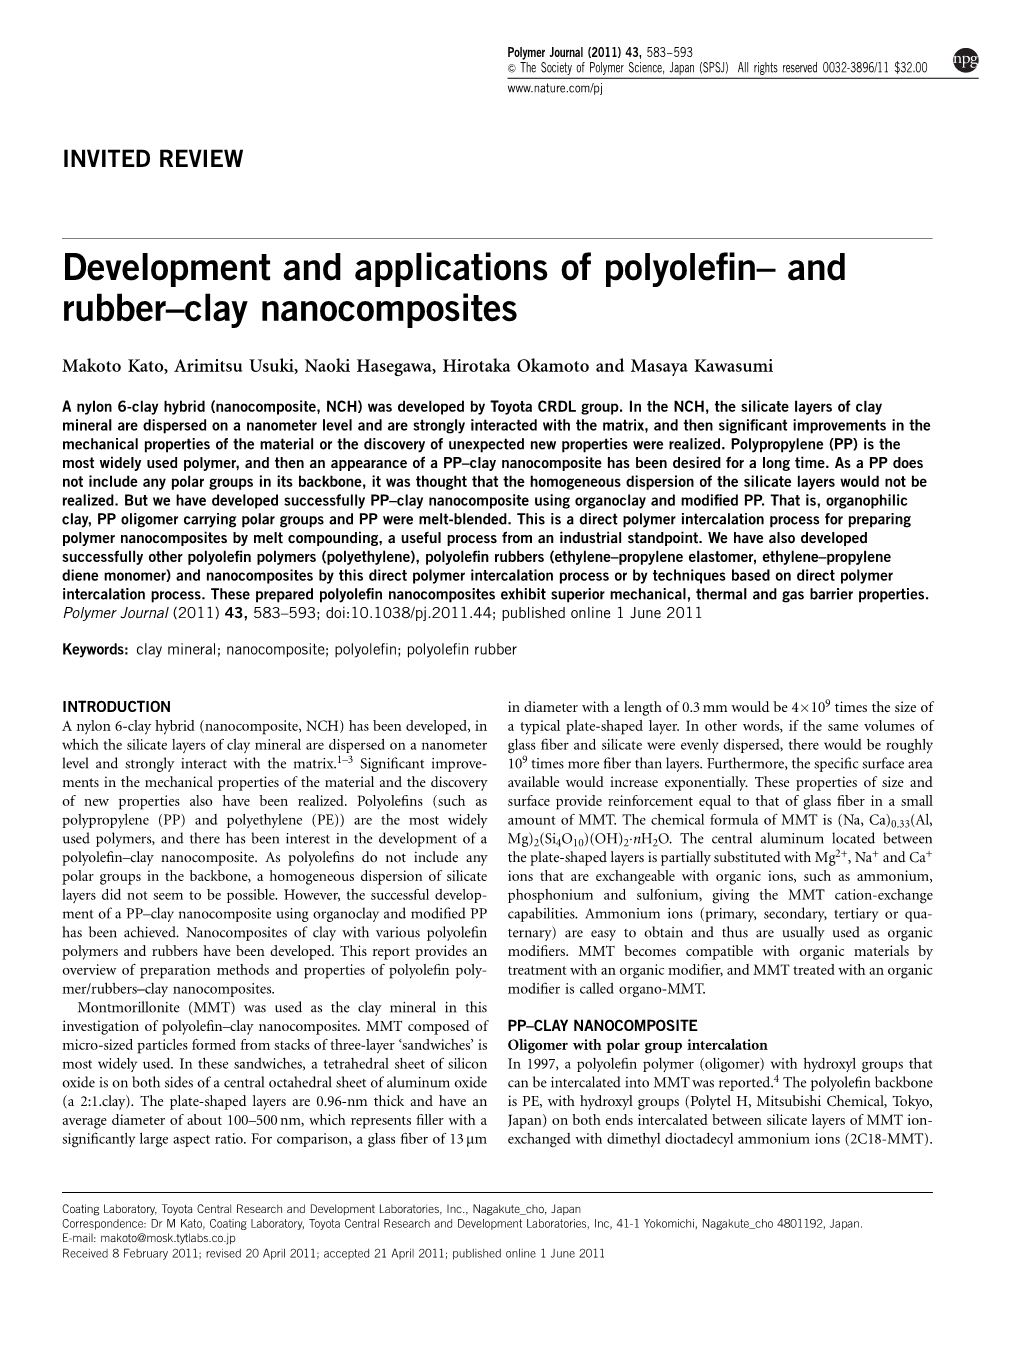 Development and Applications of Polyolefin–And Rubber–Clay Nanocomposites